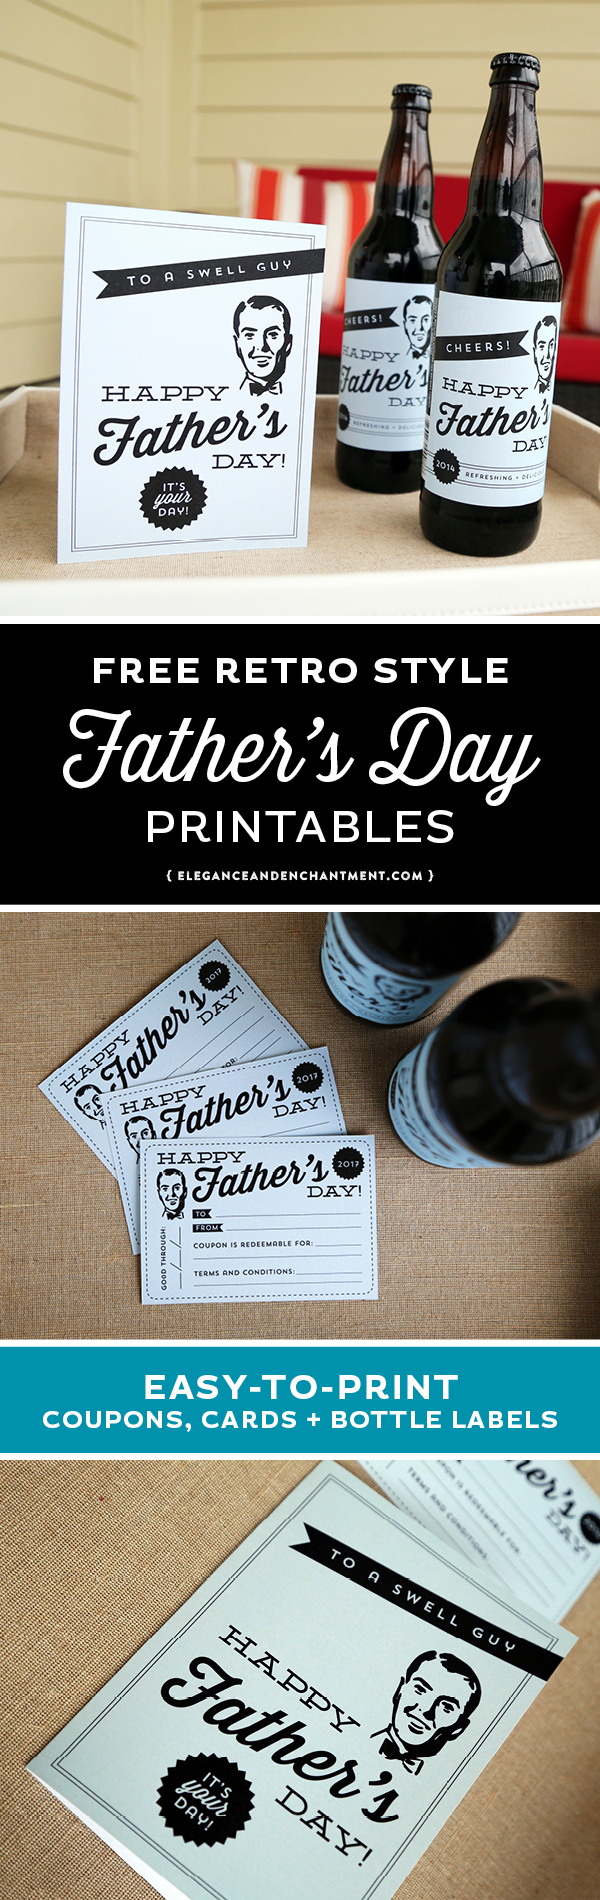 DIY Gift for Dad: Retro Style Printables 